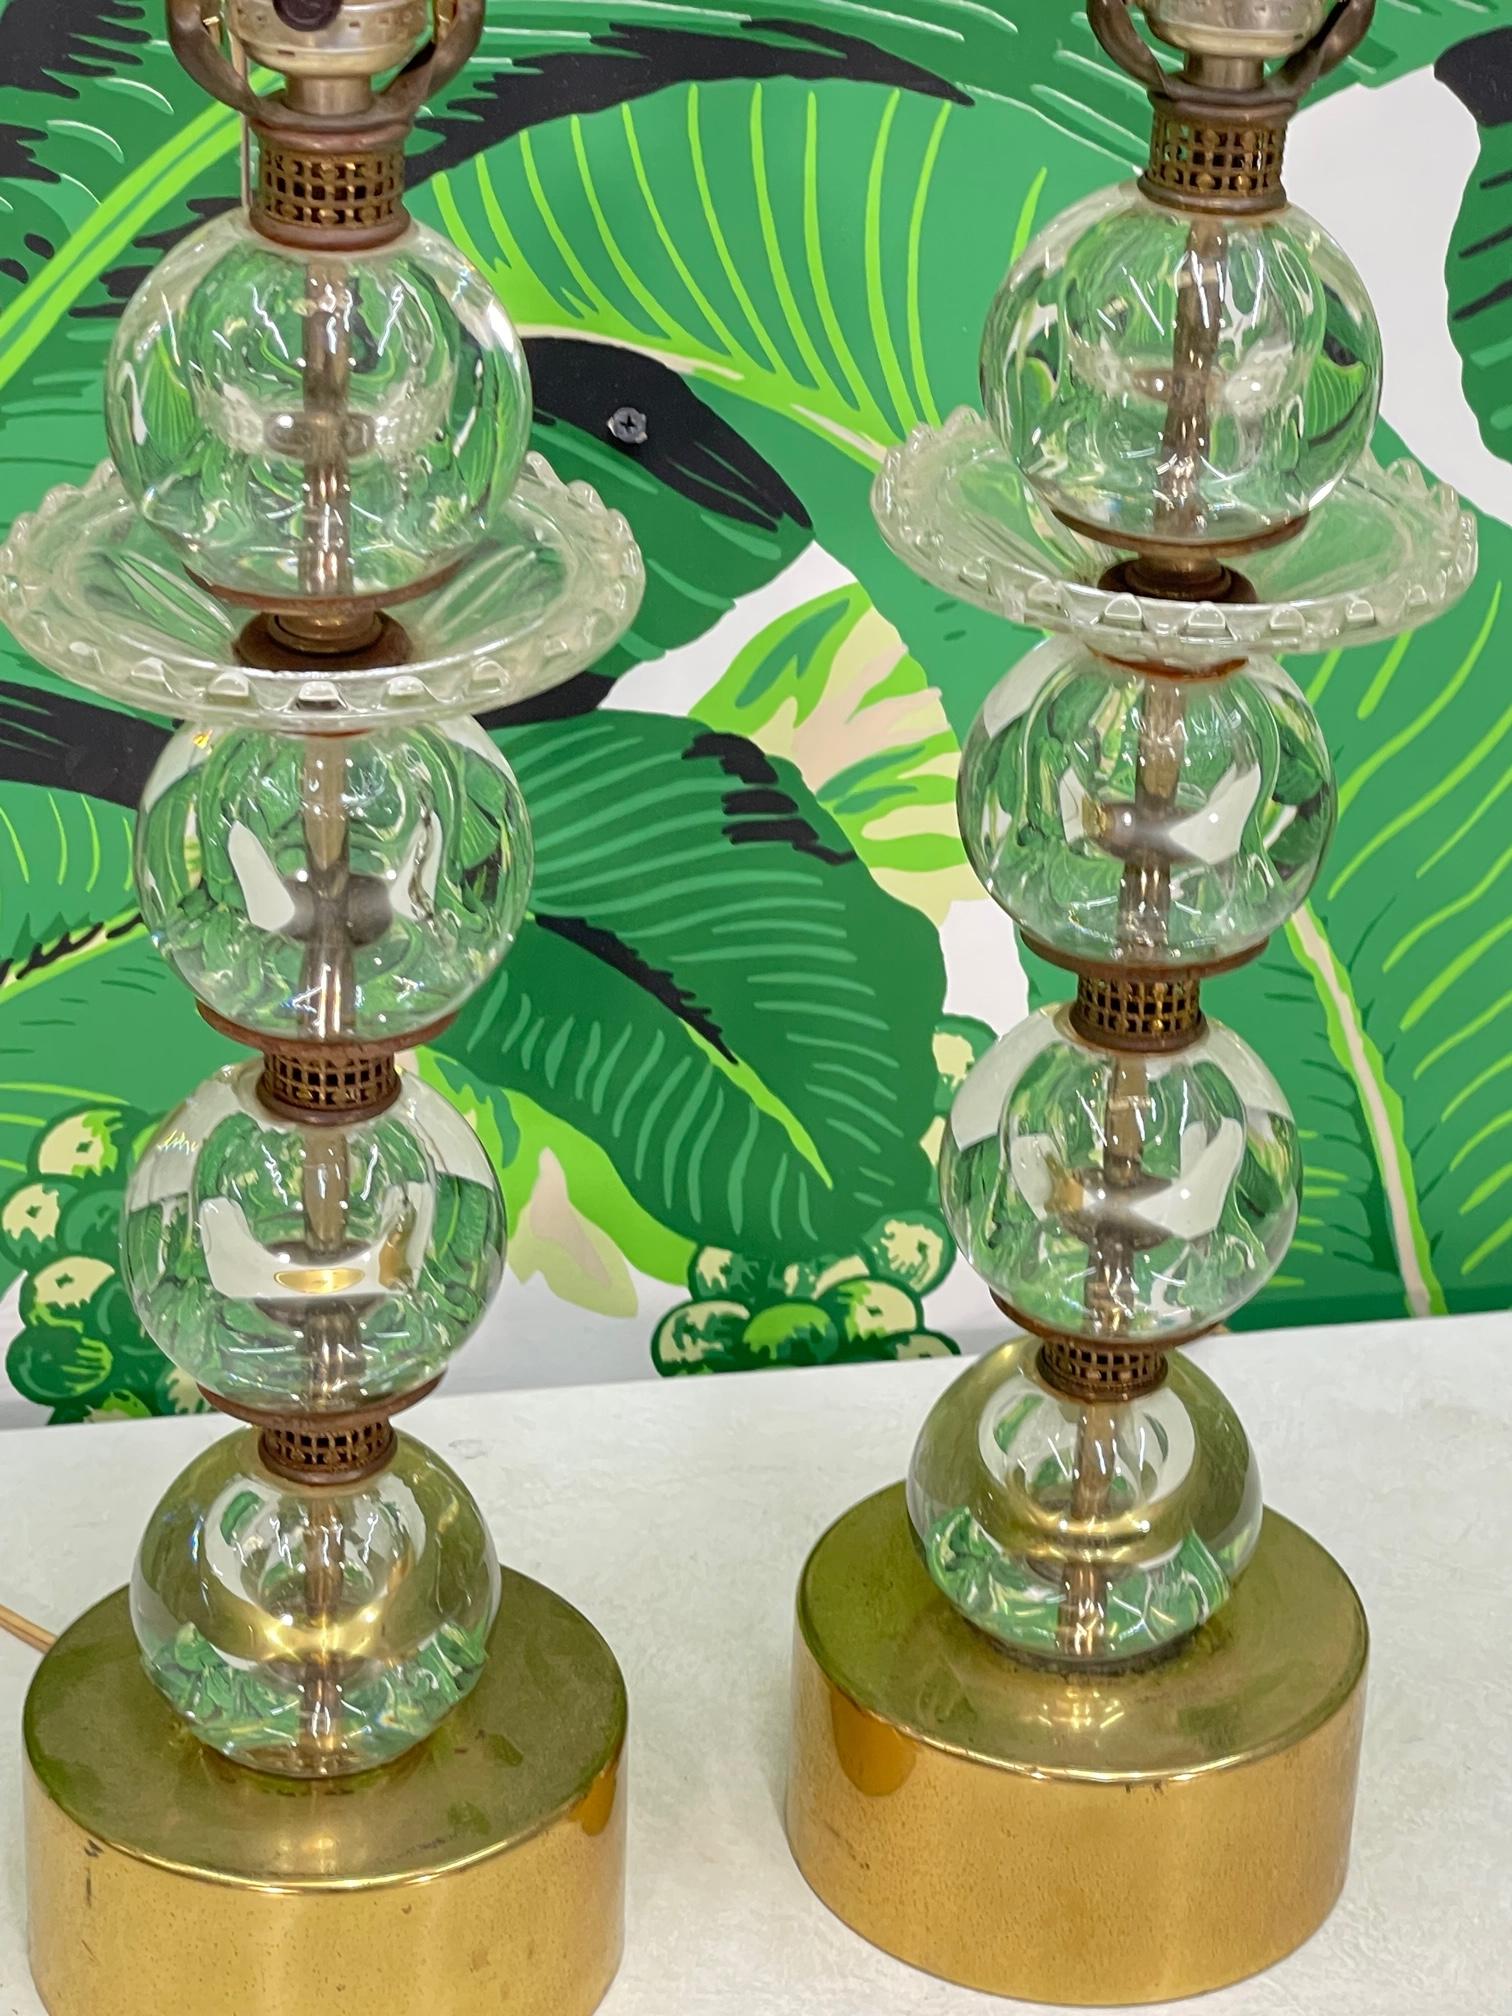 Pair of mid century table lamps feature glass spheres stacked with brass detailing and a brass base. Good condition with imperfections consistent with age, see photos for condition details. 
For a shipping quote to your exact zip code, please